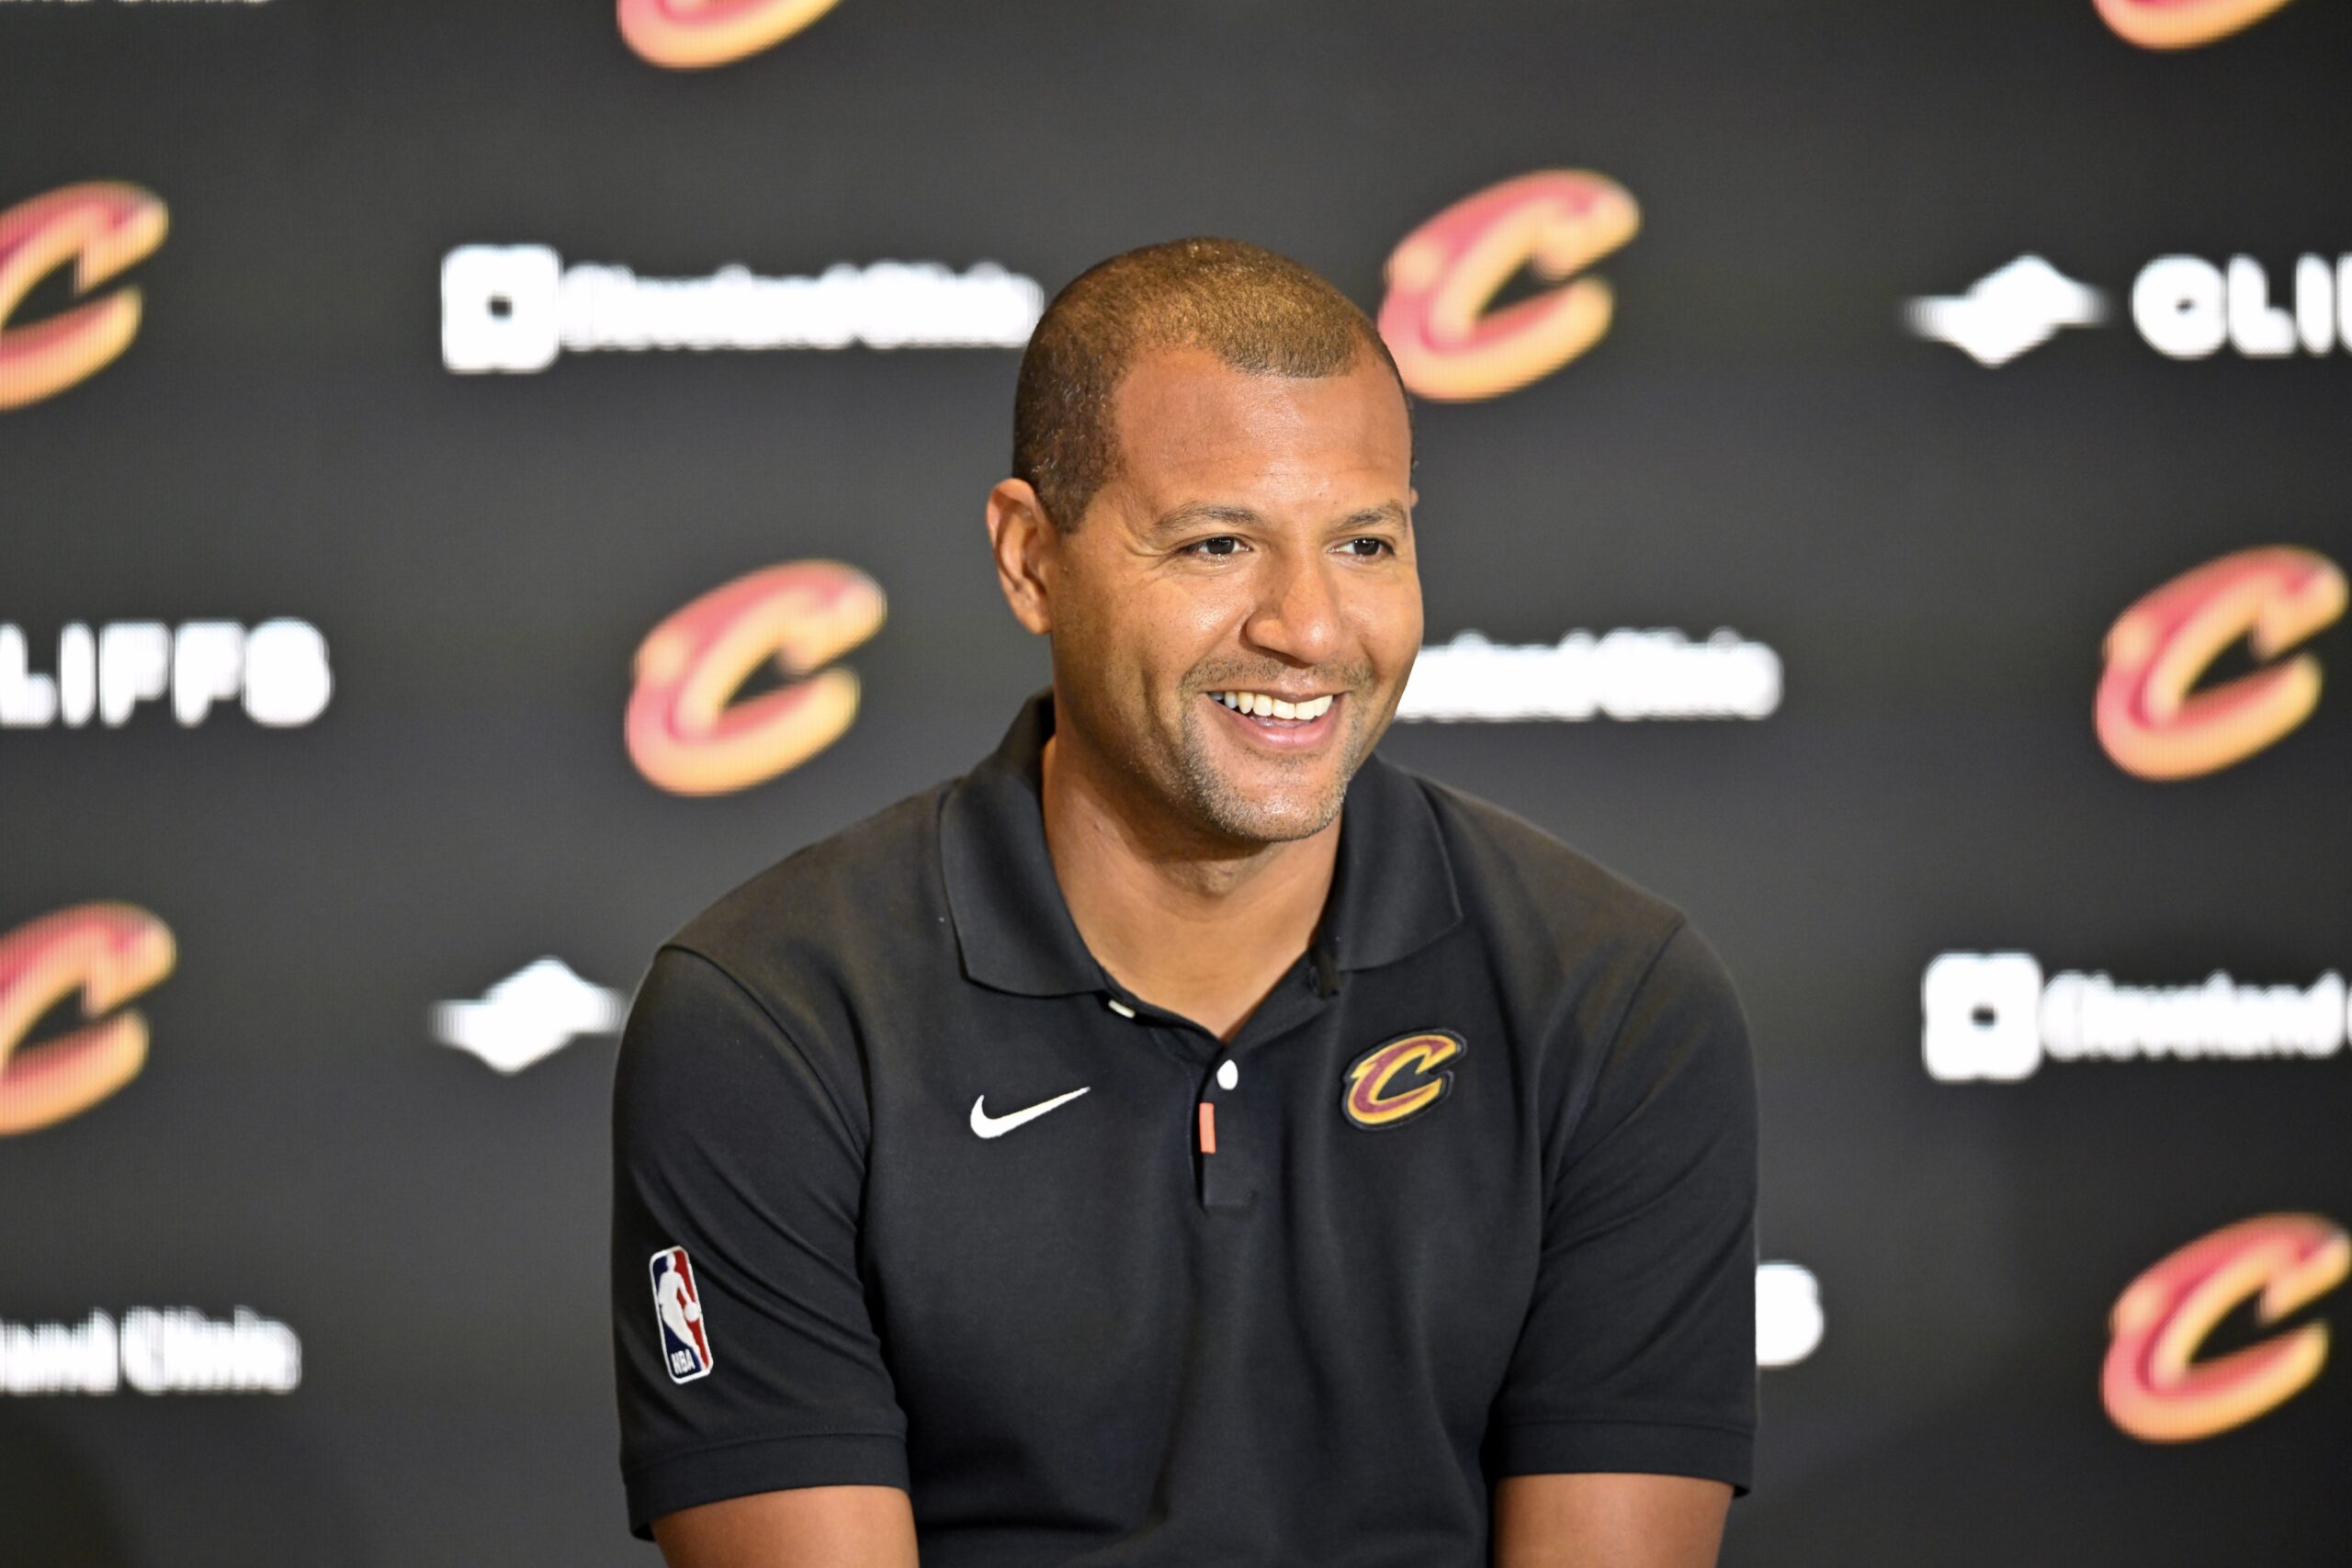 Sep 14, 2022; Cleveland, OH, USA; Cleveland Cavaliers president of basketball operations Koby Altman speaks to the media during an introductory press conference at Rocket Mortgage FieldHouse. Mandatory Credit: David Richard-USA TODAY Sports